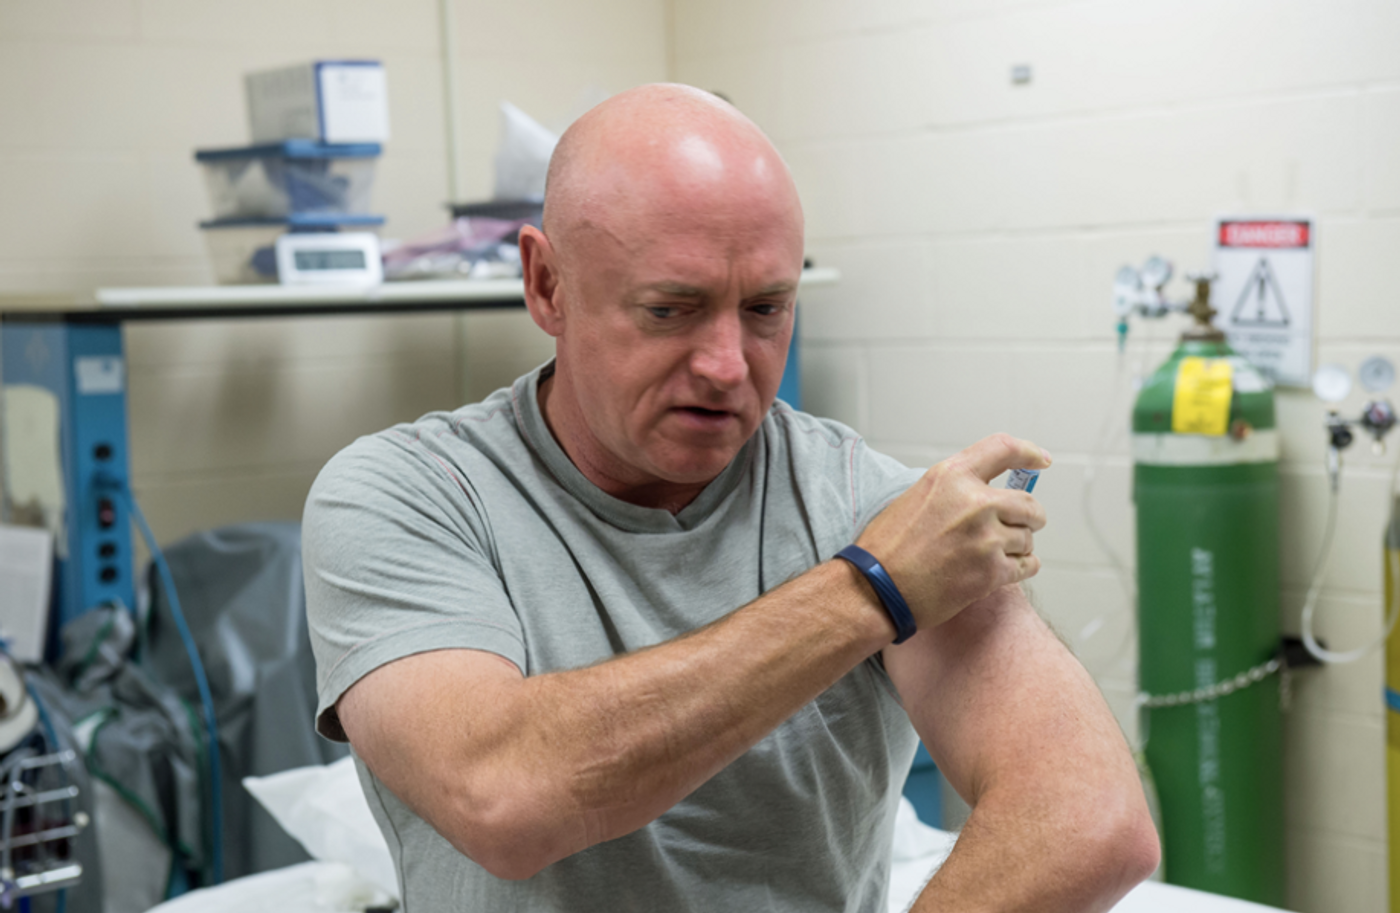 View of former astronaut Mark Kelly during his lab testing and flu shot in support of the Twins Study with his brother Scott Kelly. / Credit: NASA